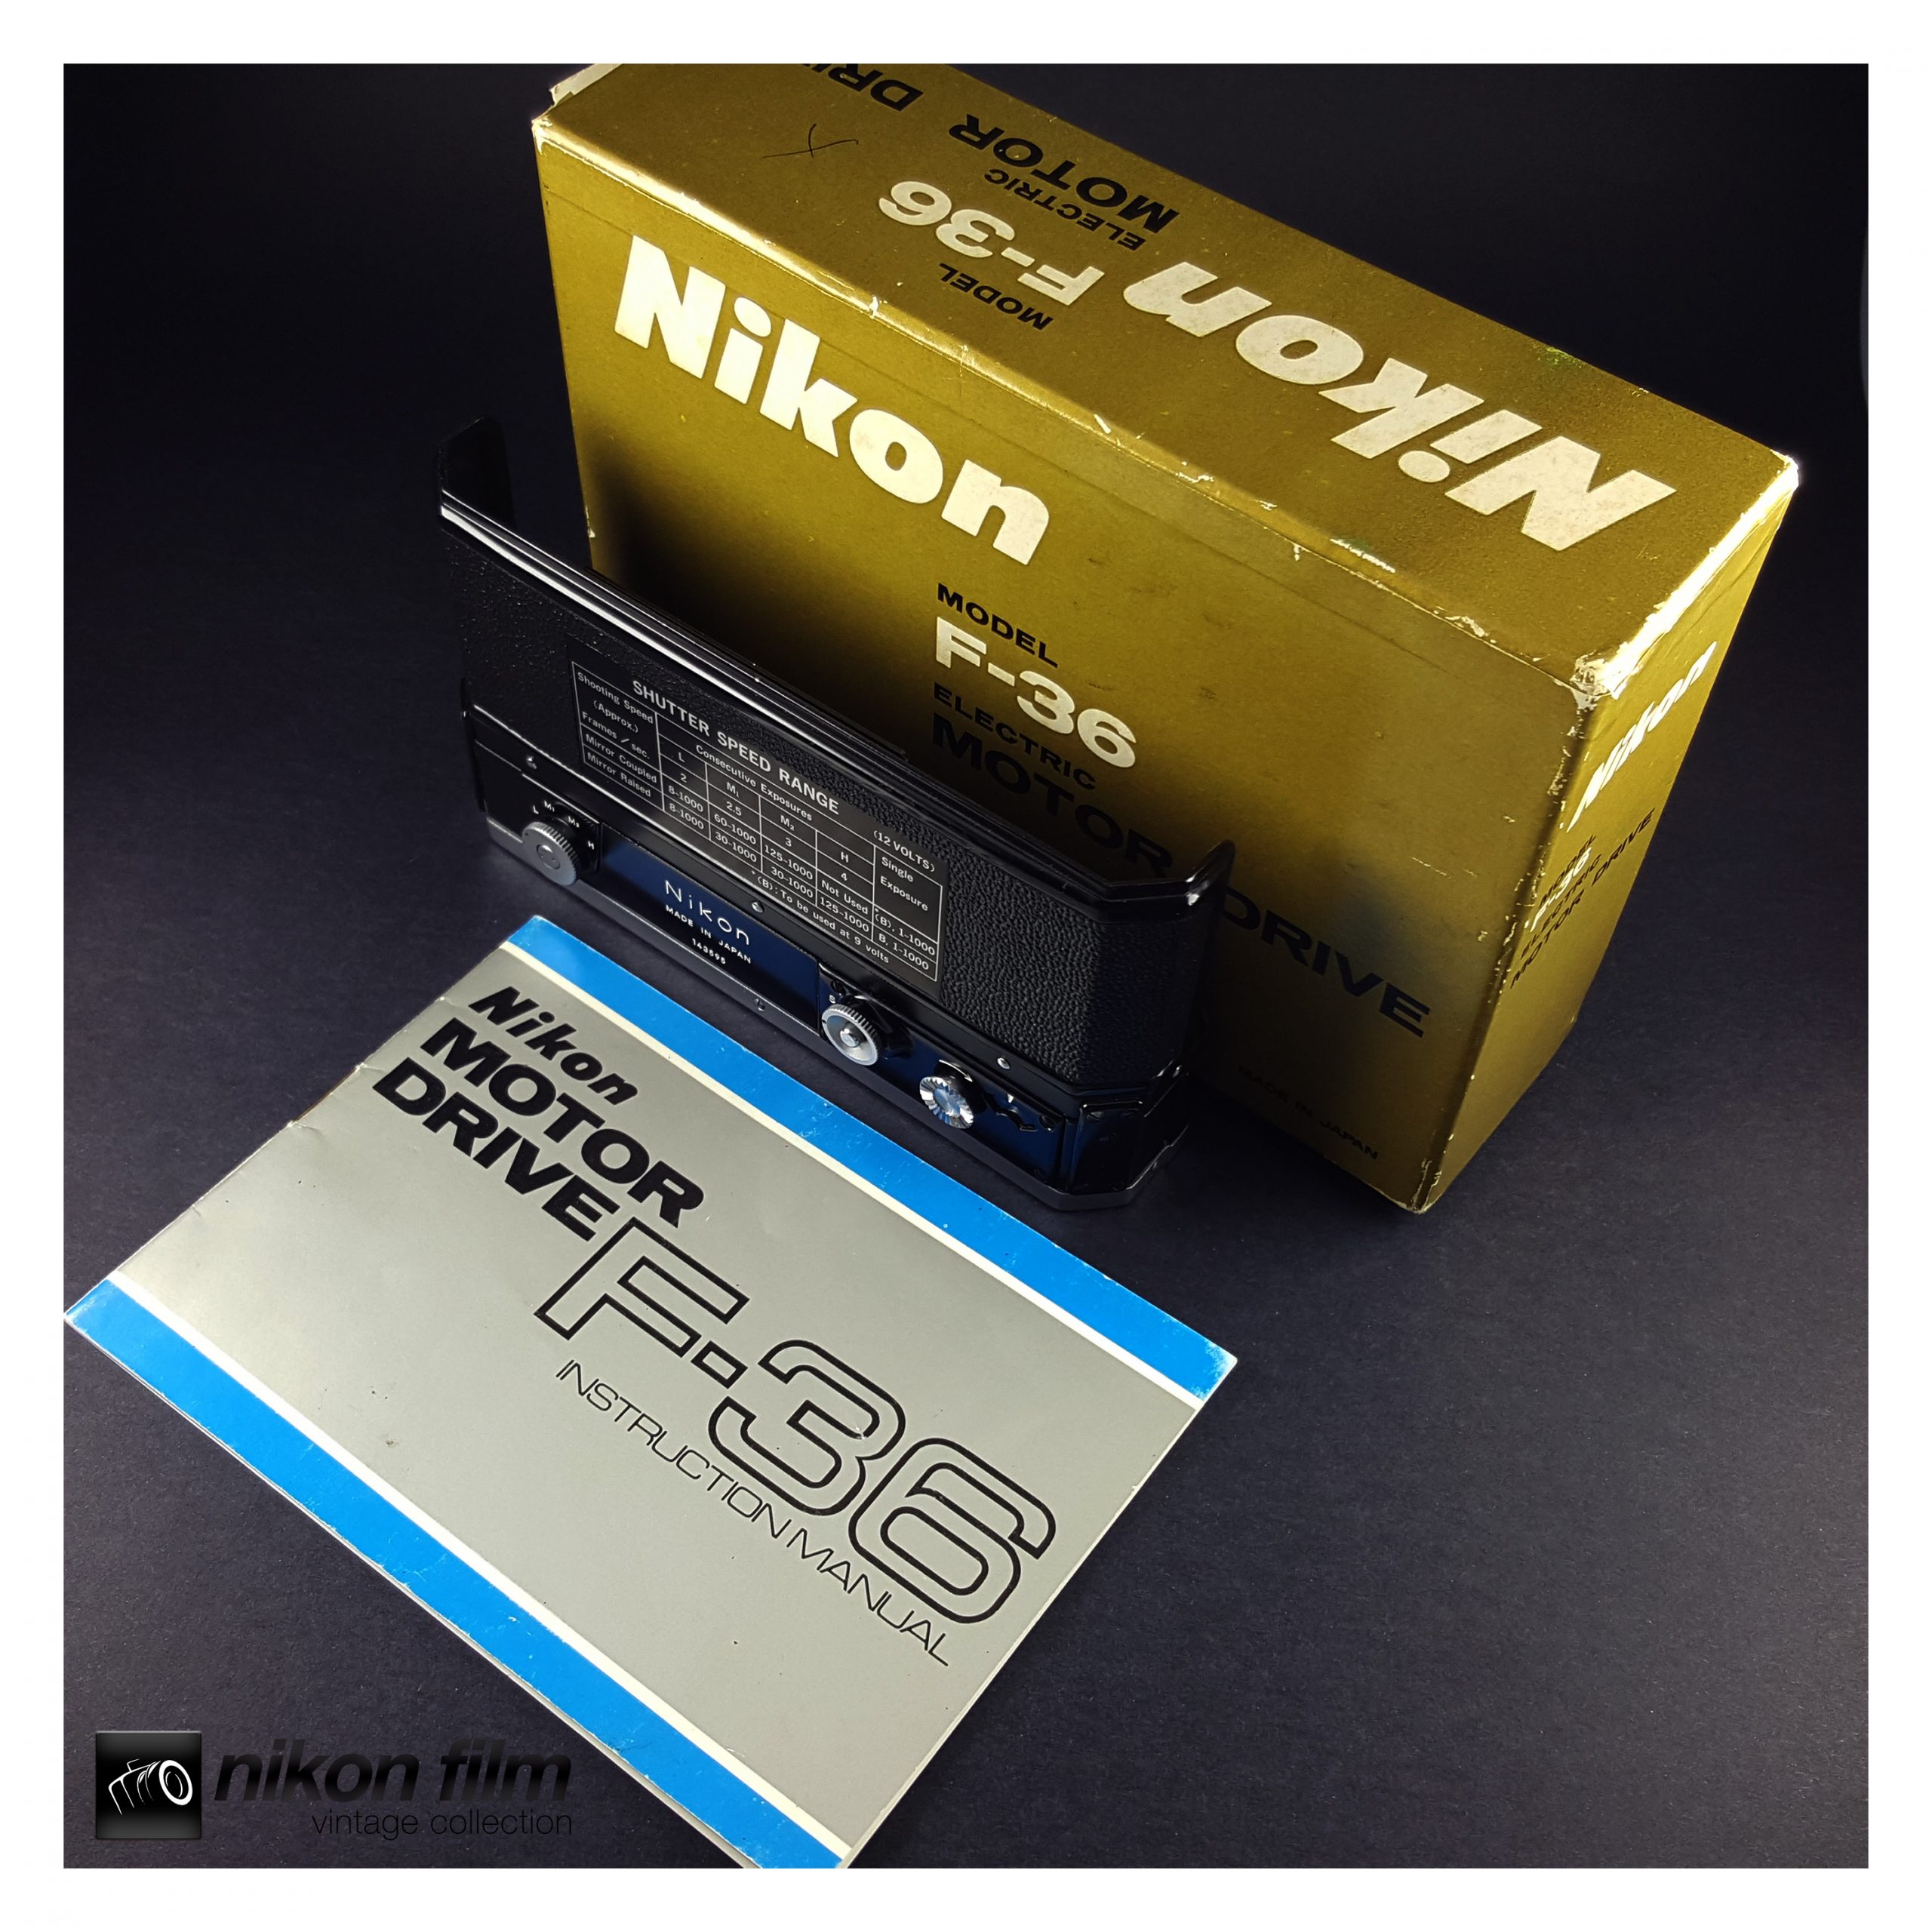 31005 Nikon F36 Electric Motor Drive Boxed 1 scaled